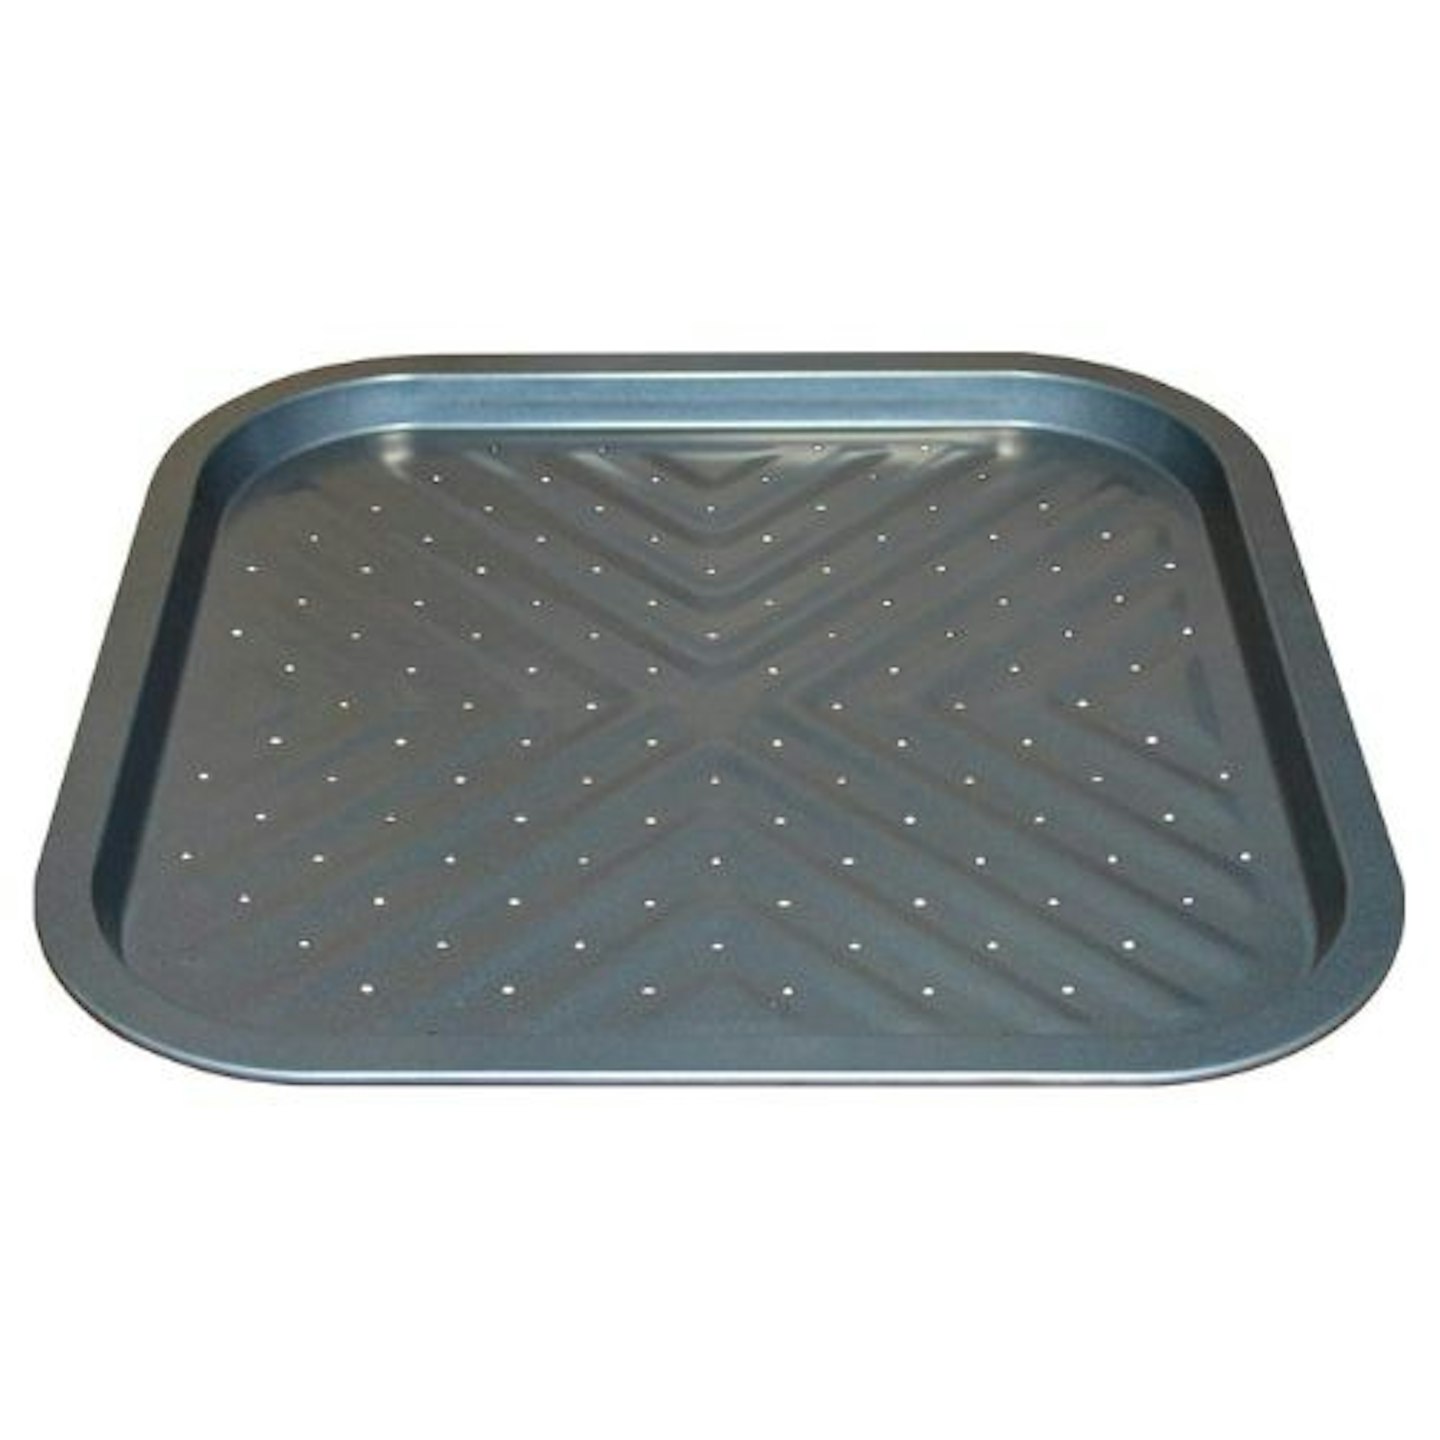 Mingcao Nonstick Square Pizza Pan, 14 x14 Inch Carbon Steel Tray with Holes, Pizza Bakeware for Oven Baking Pizza,French Fries